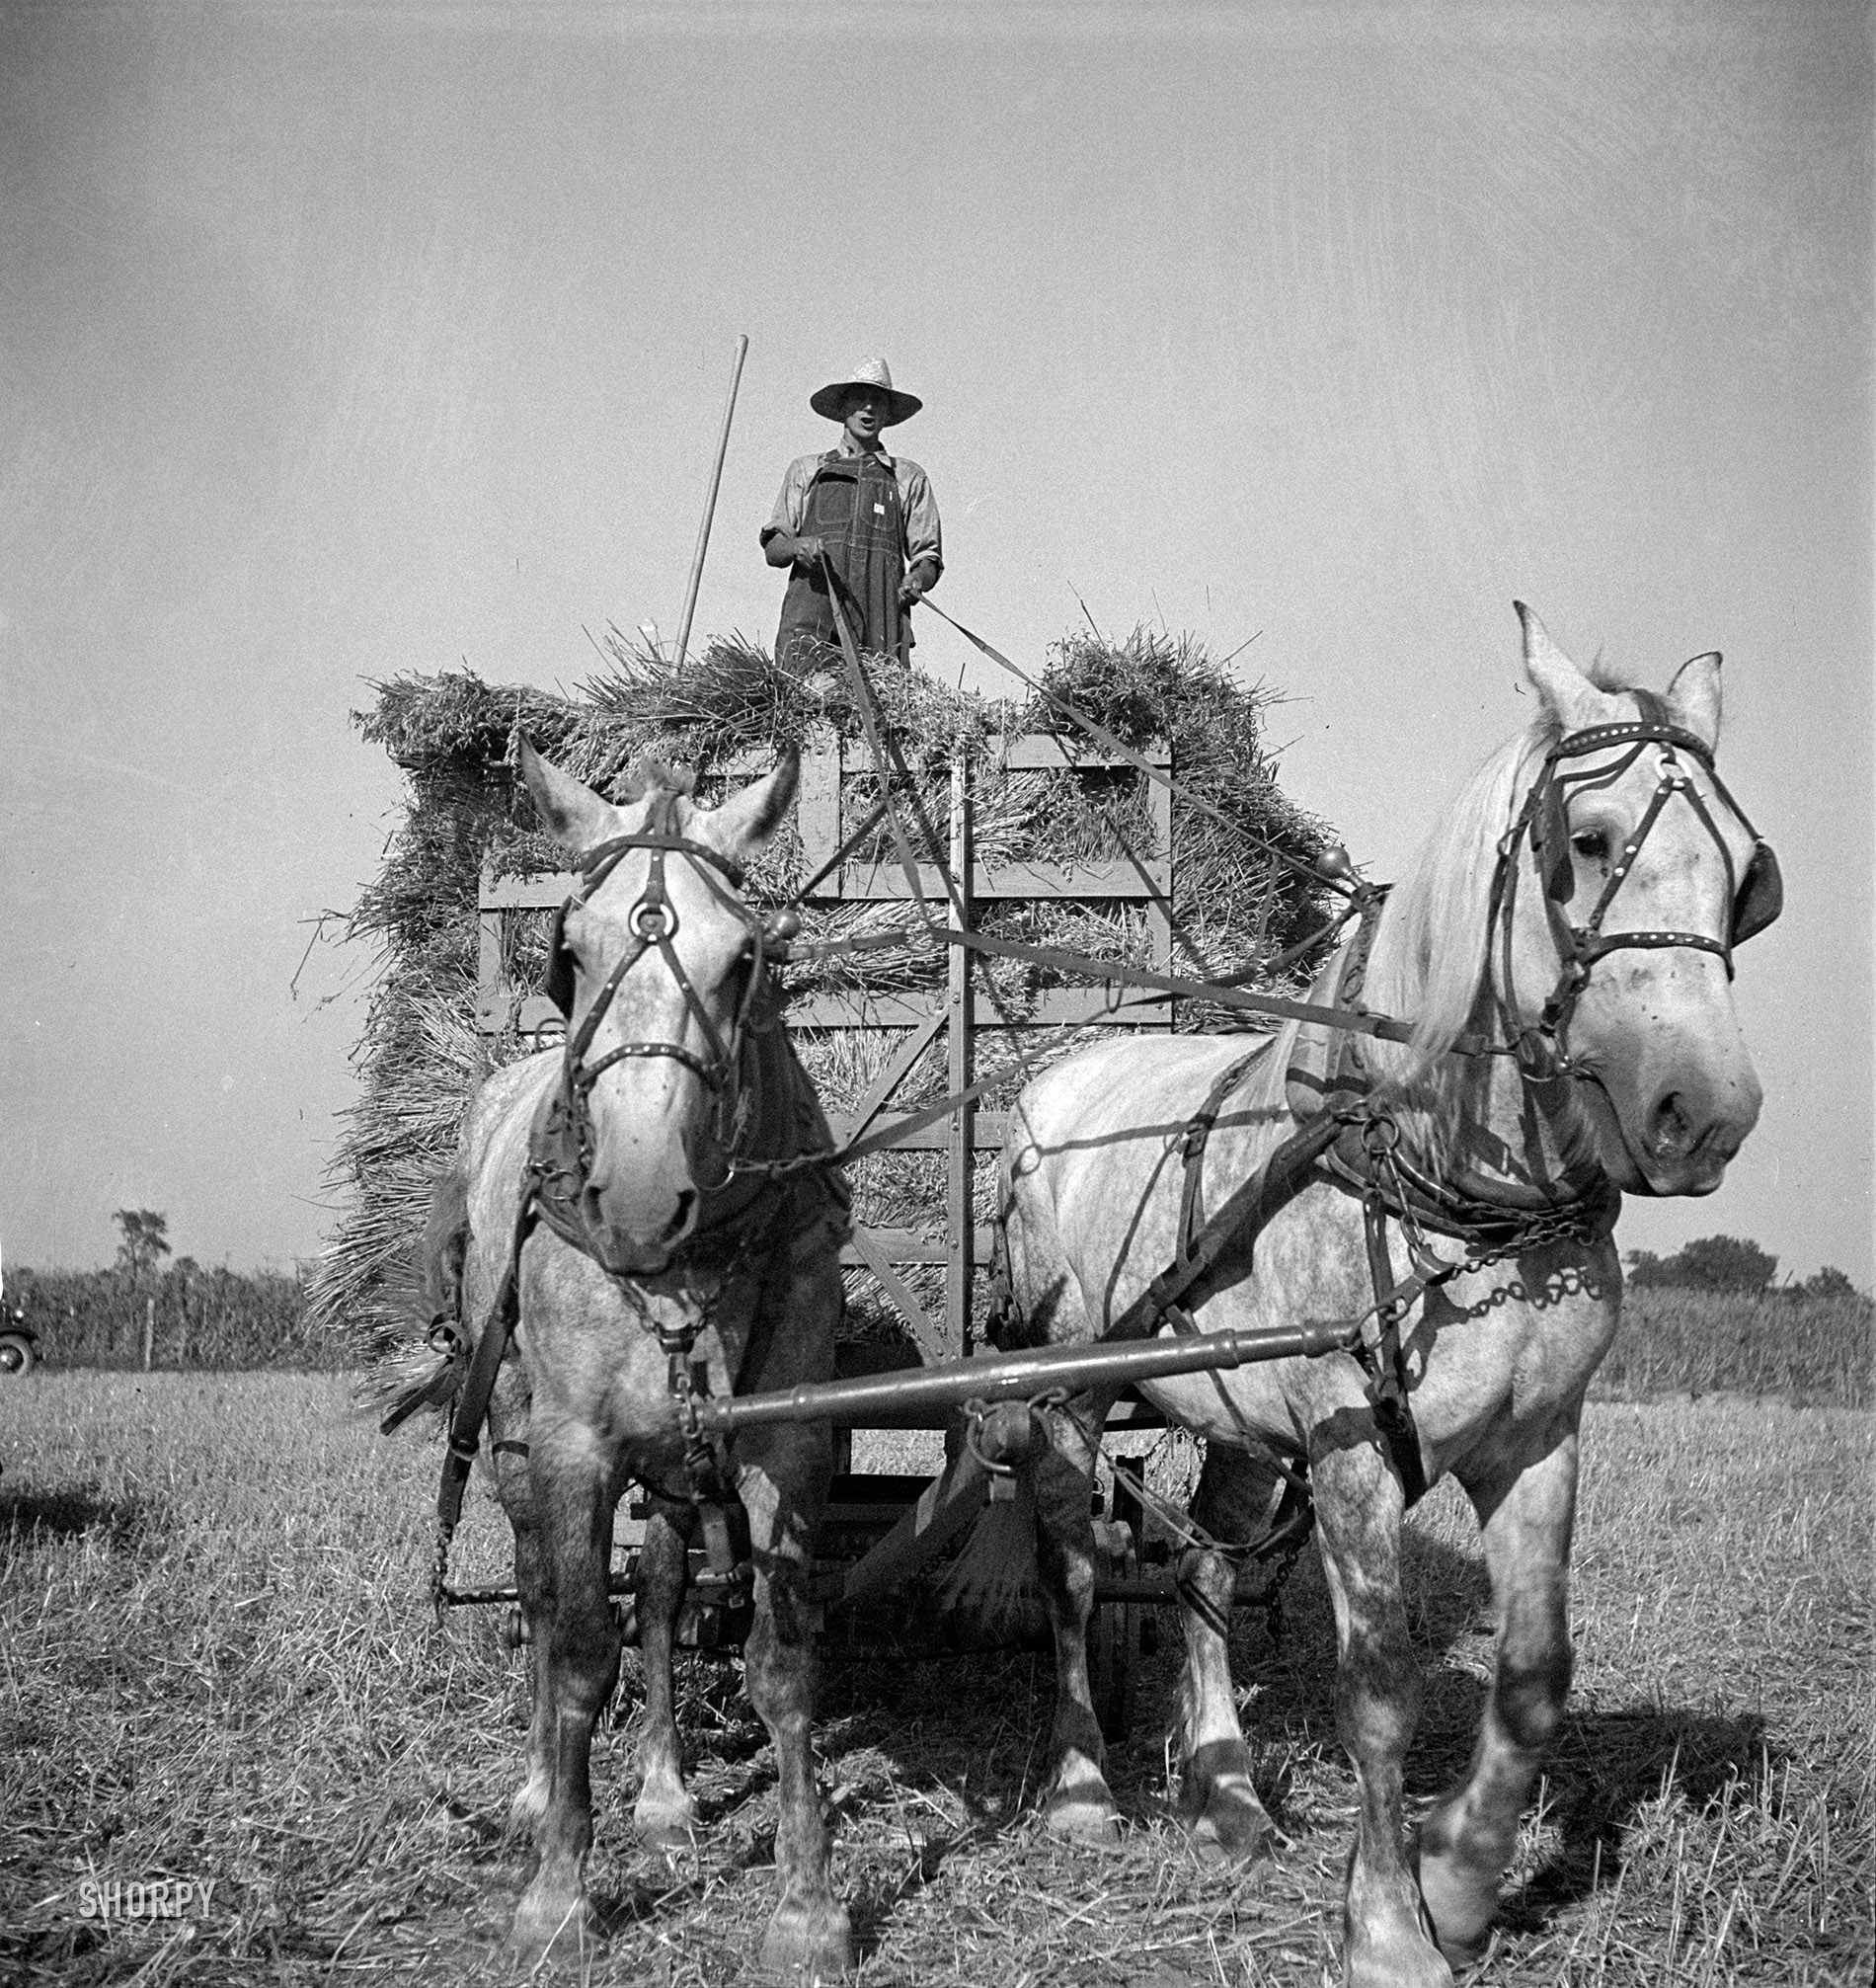 July 1936. "Harvesting oats. Clayton, Indiana, south of Indianapolis." Medium-format nitrate negative by Dorothea Lange. View full size.